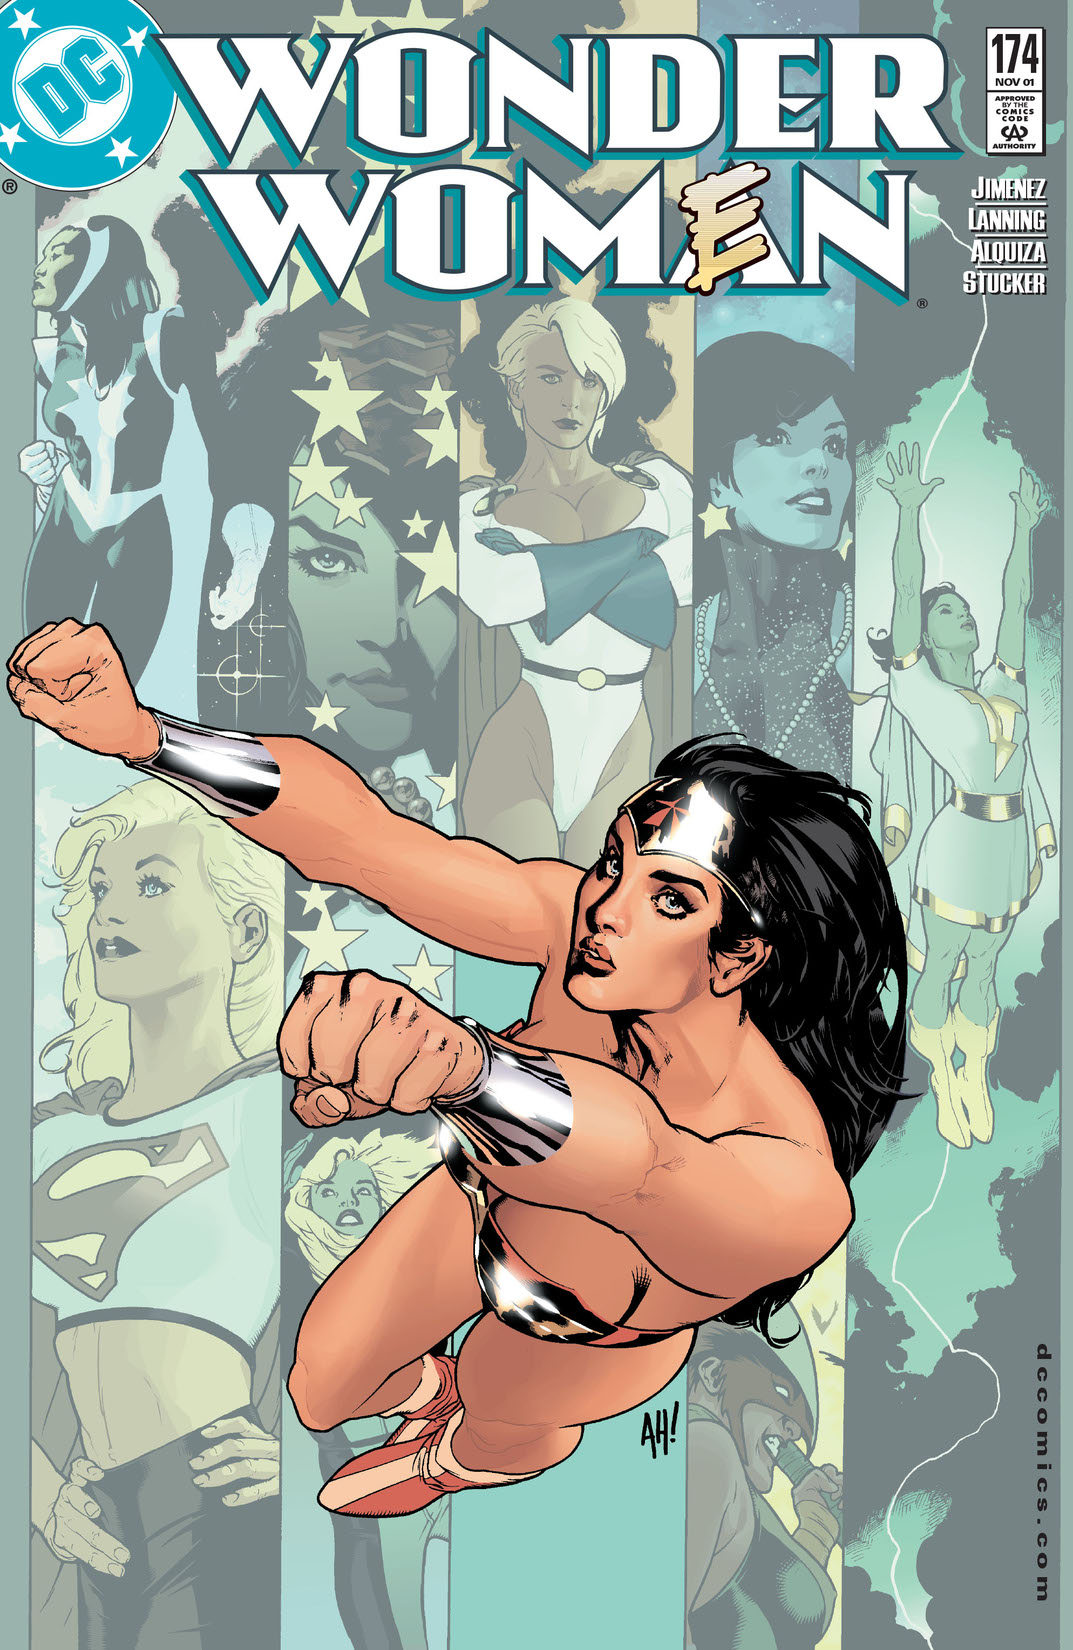 Wonder Woman (1986-) #174 preview images